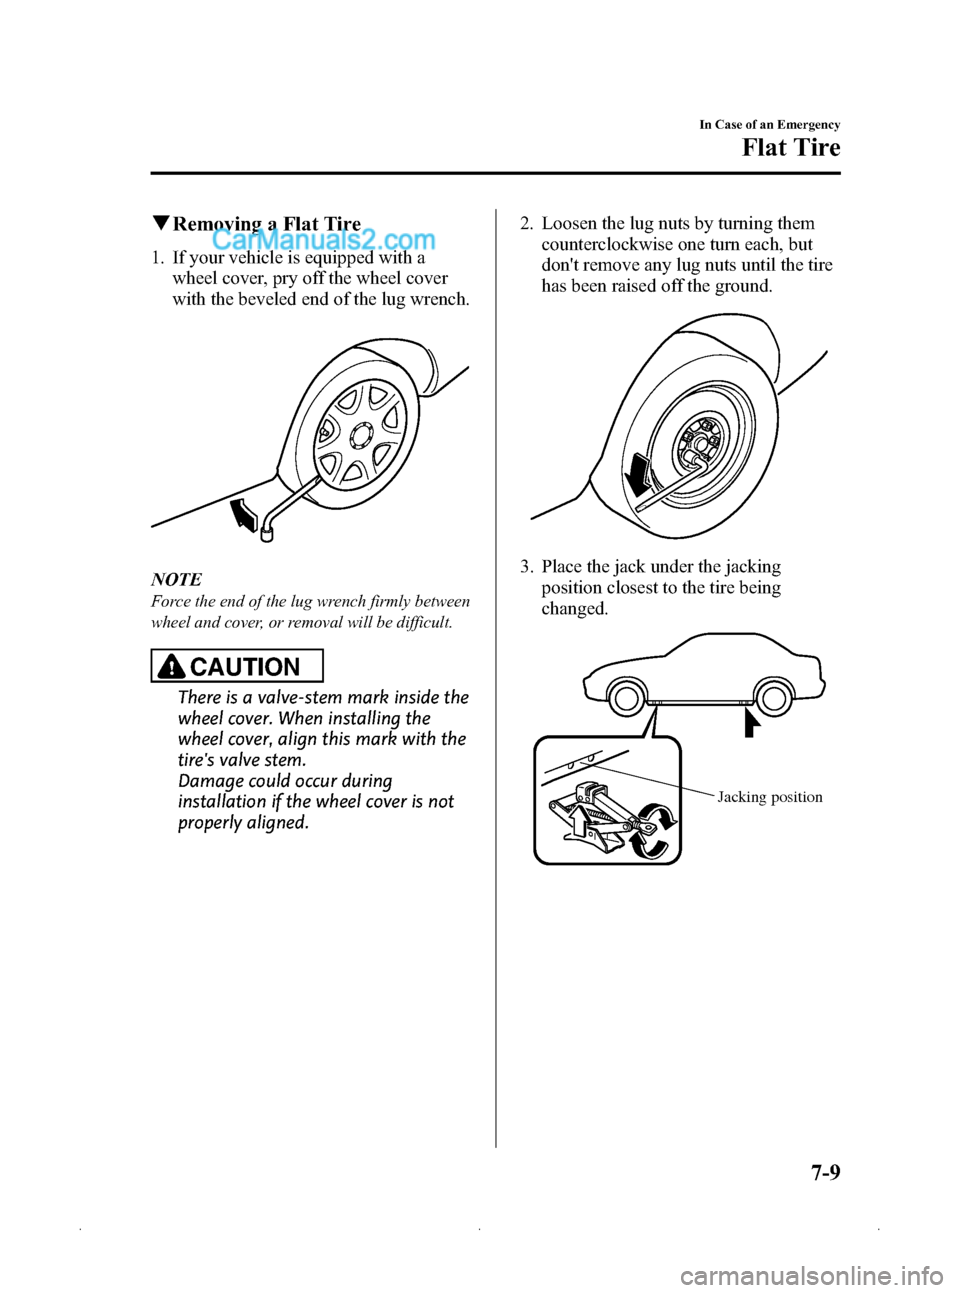 MAZDA MODEL MAZDASPEED 3 2009   (in English) User Guide Black plate (271,1)
qRemoving a Flat Tire
1. If your vehicle is equipped with a
wheel cover, pry off the wheel cover
with the beveled end of the lug wrench.
NOTE
Force the end of the lug wrench firmly